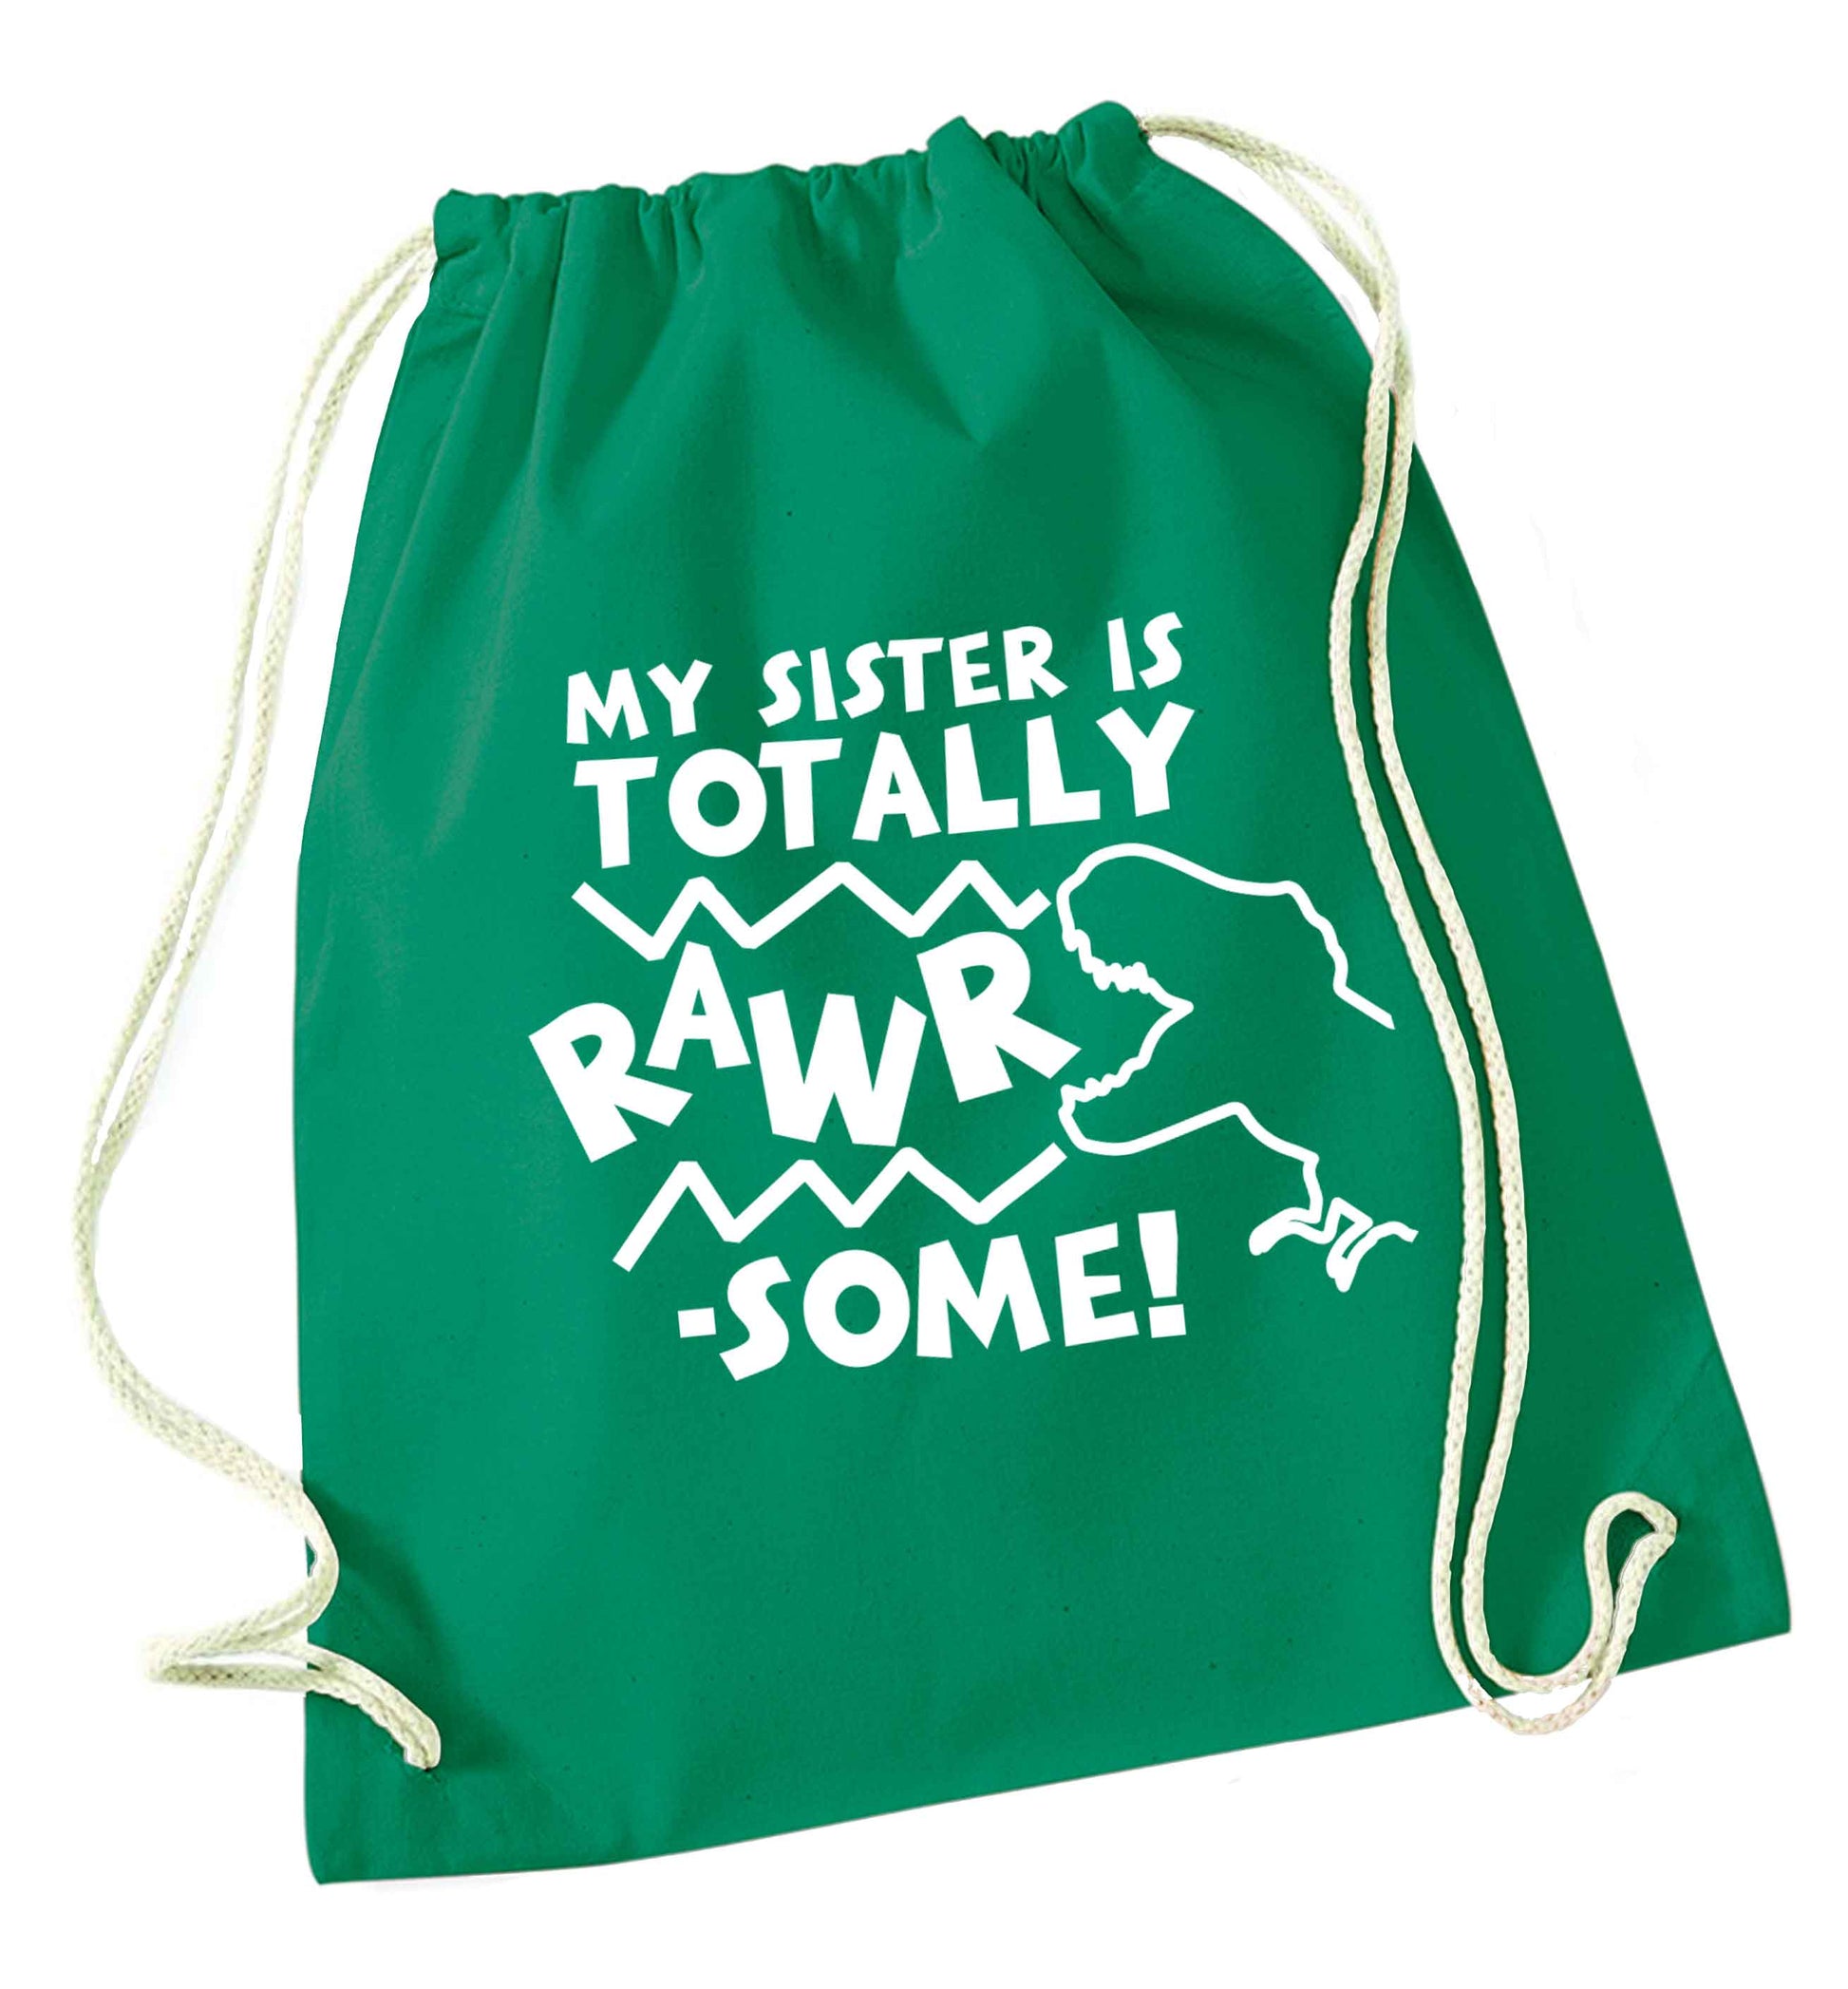 My sister is totally rawrsome green drawstring bag